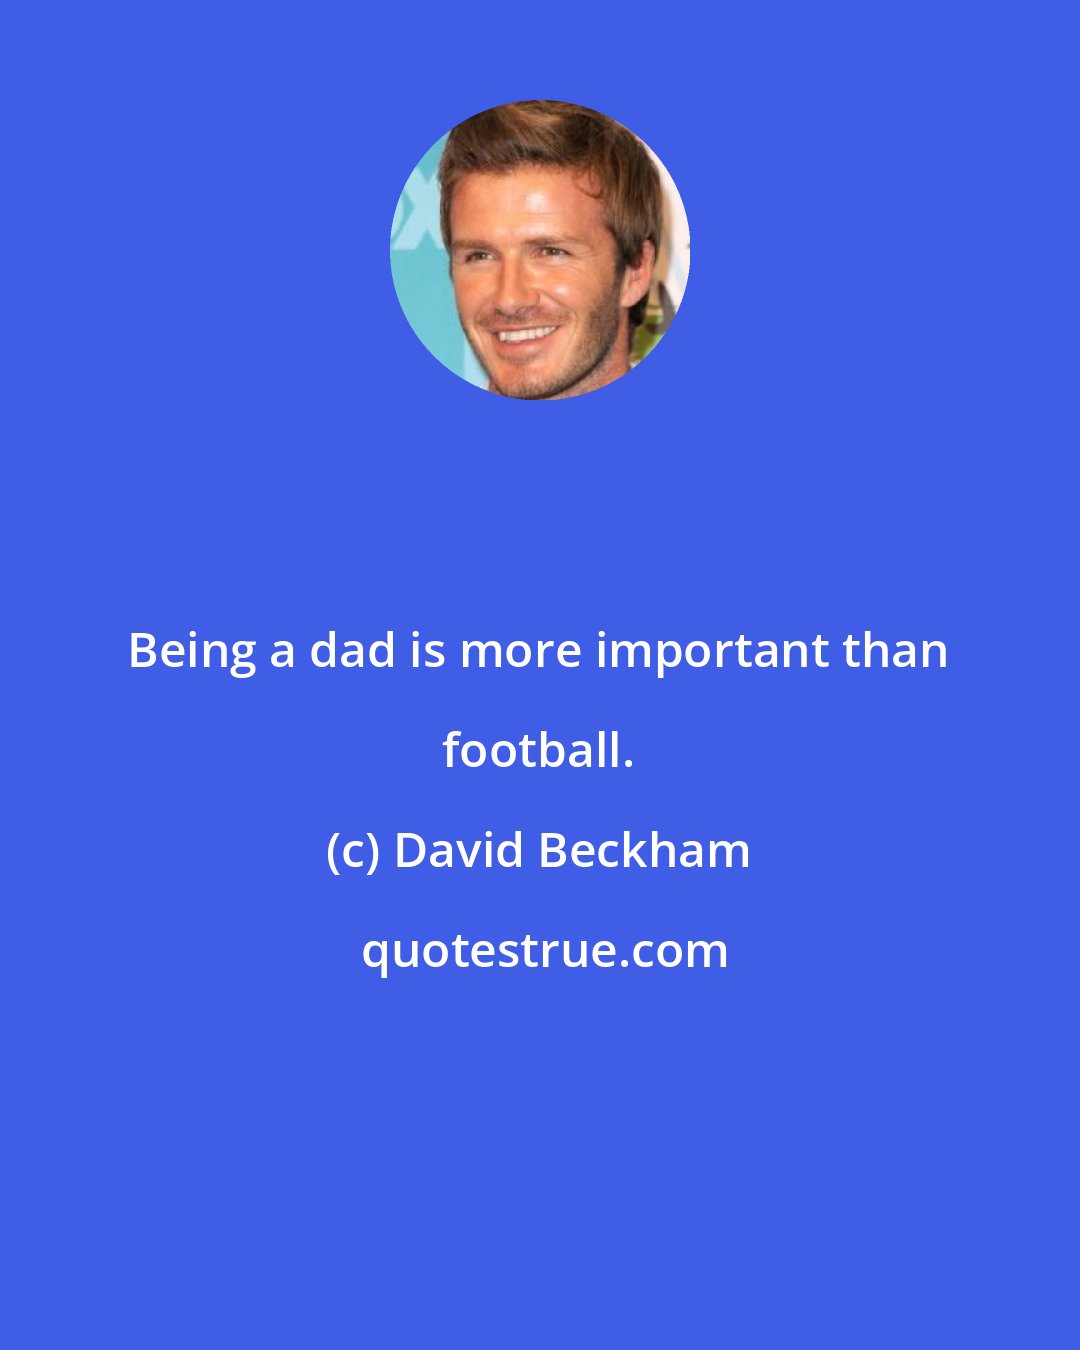 David Beckham: Being a dad is more important than football.